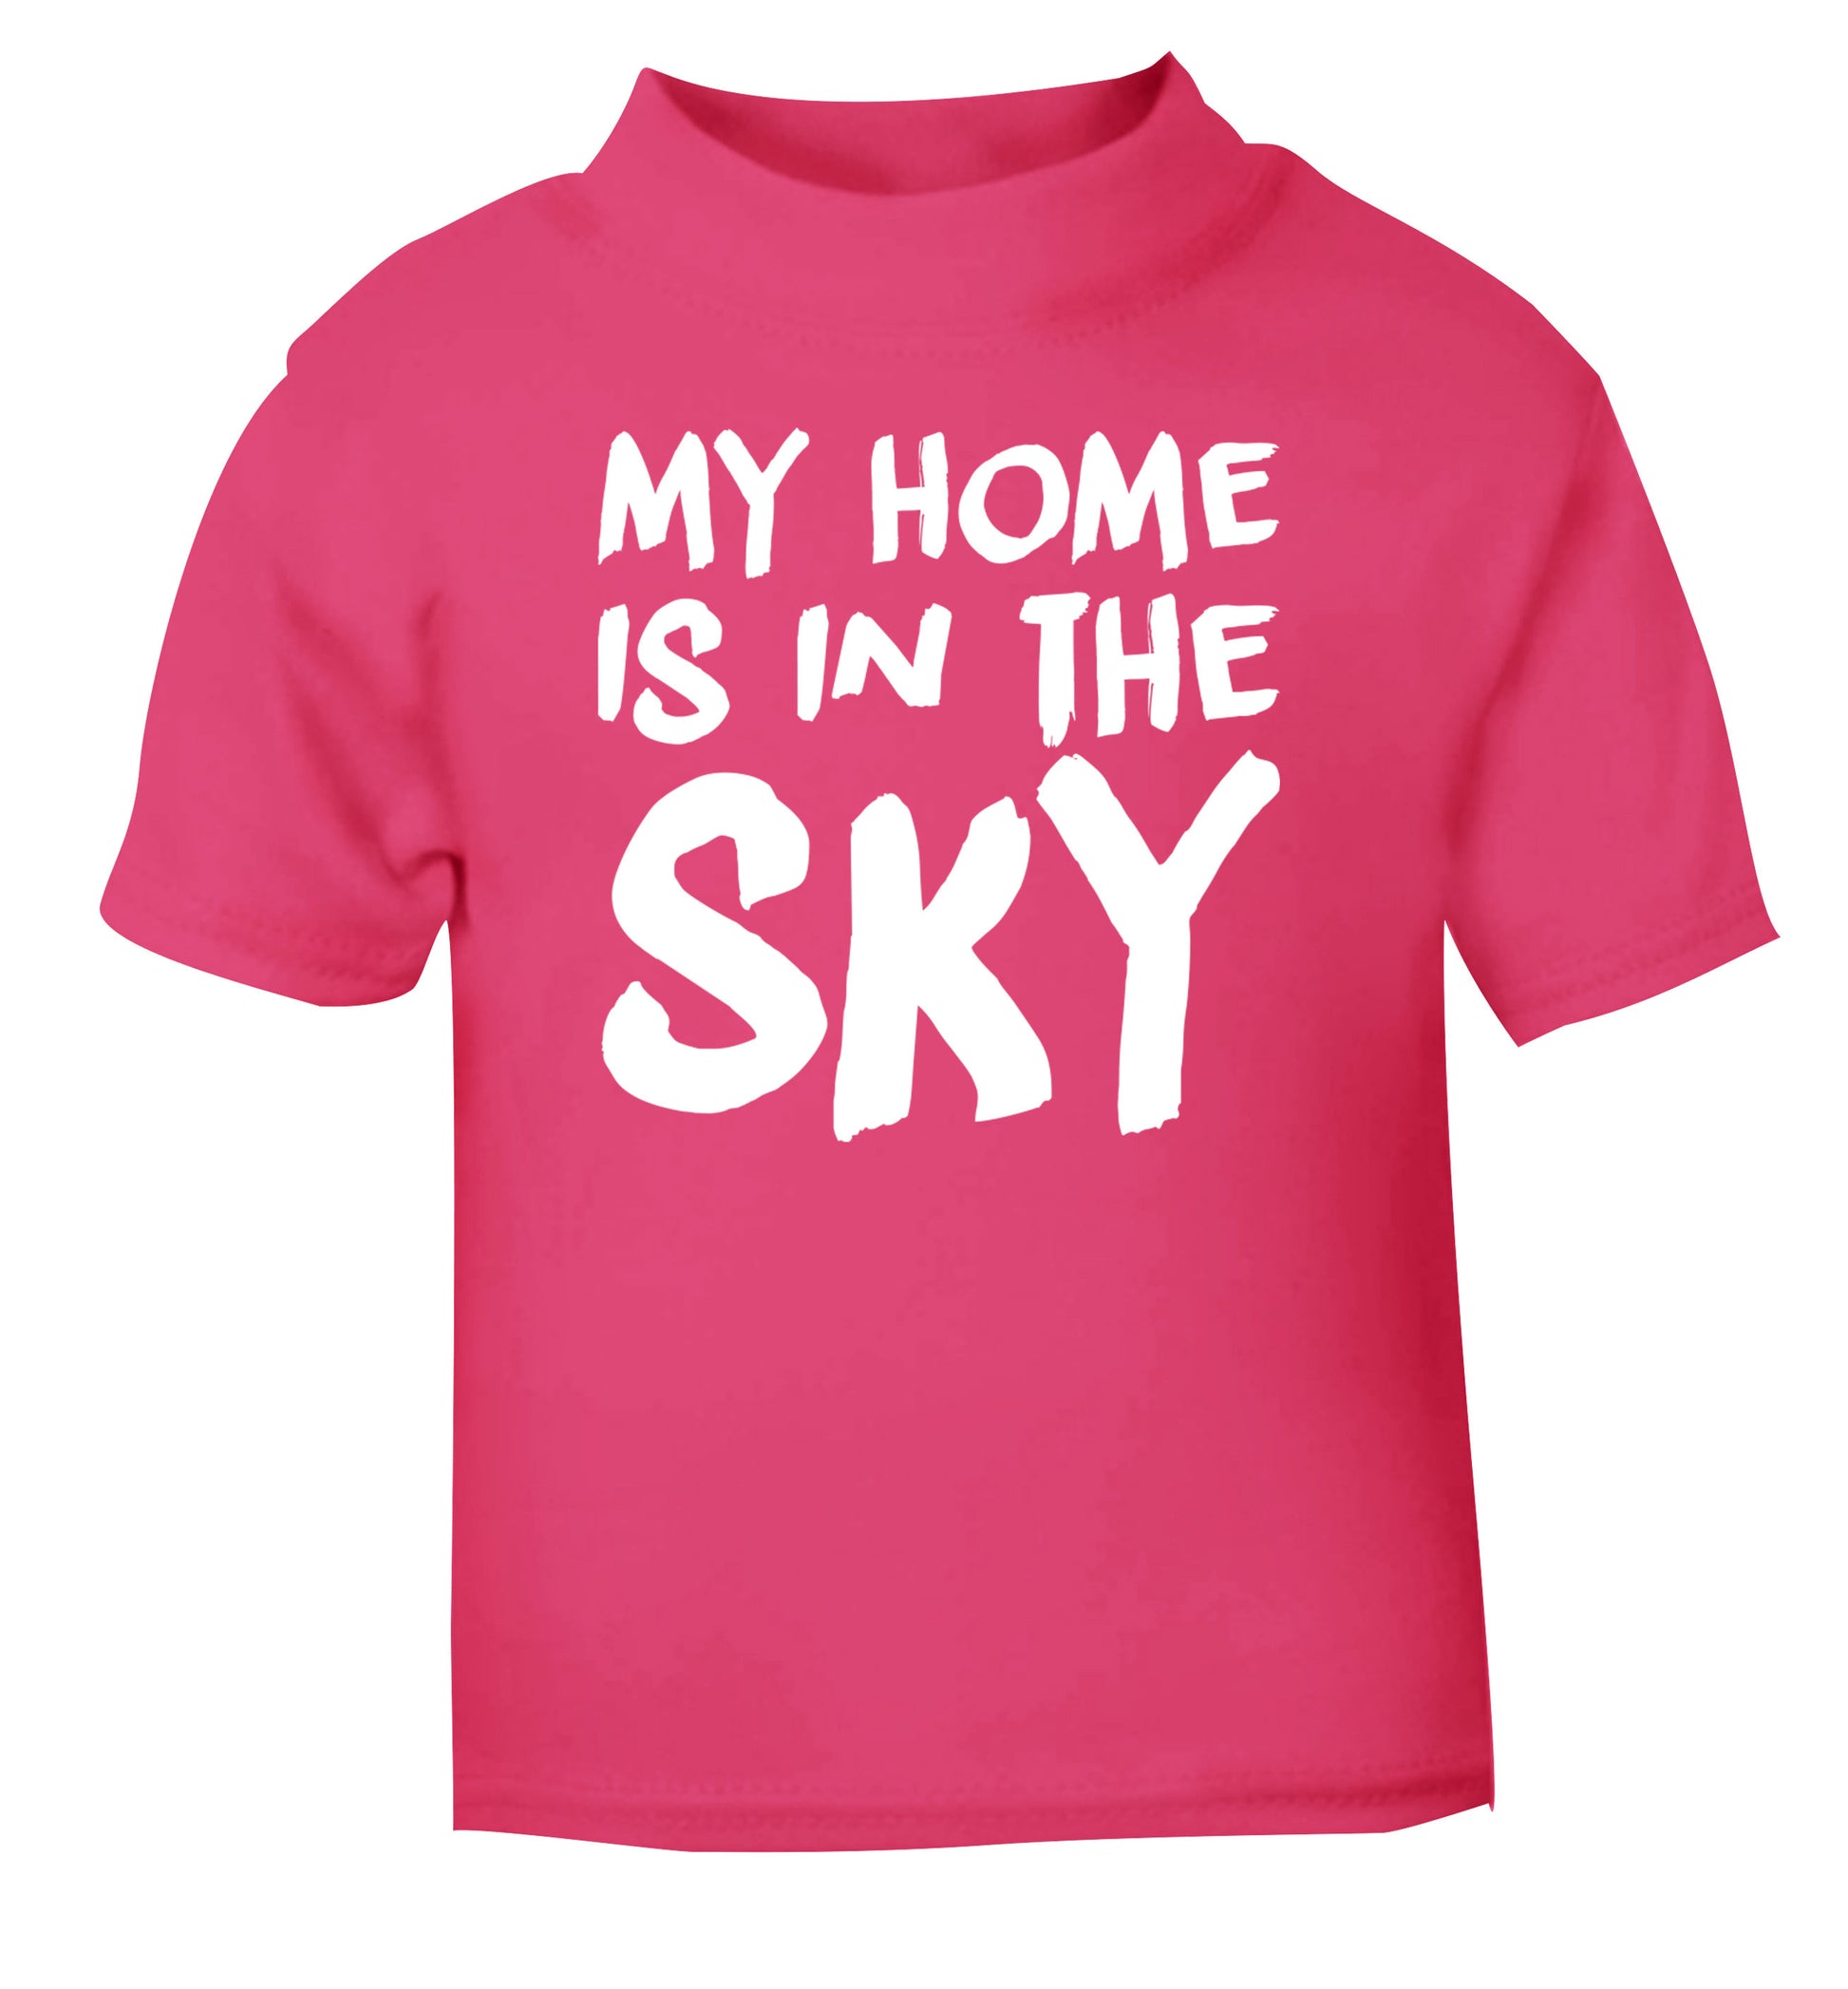 My home is in the sky pink Baby Toddler Tshirt 2 Years